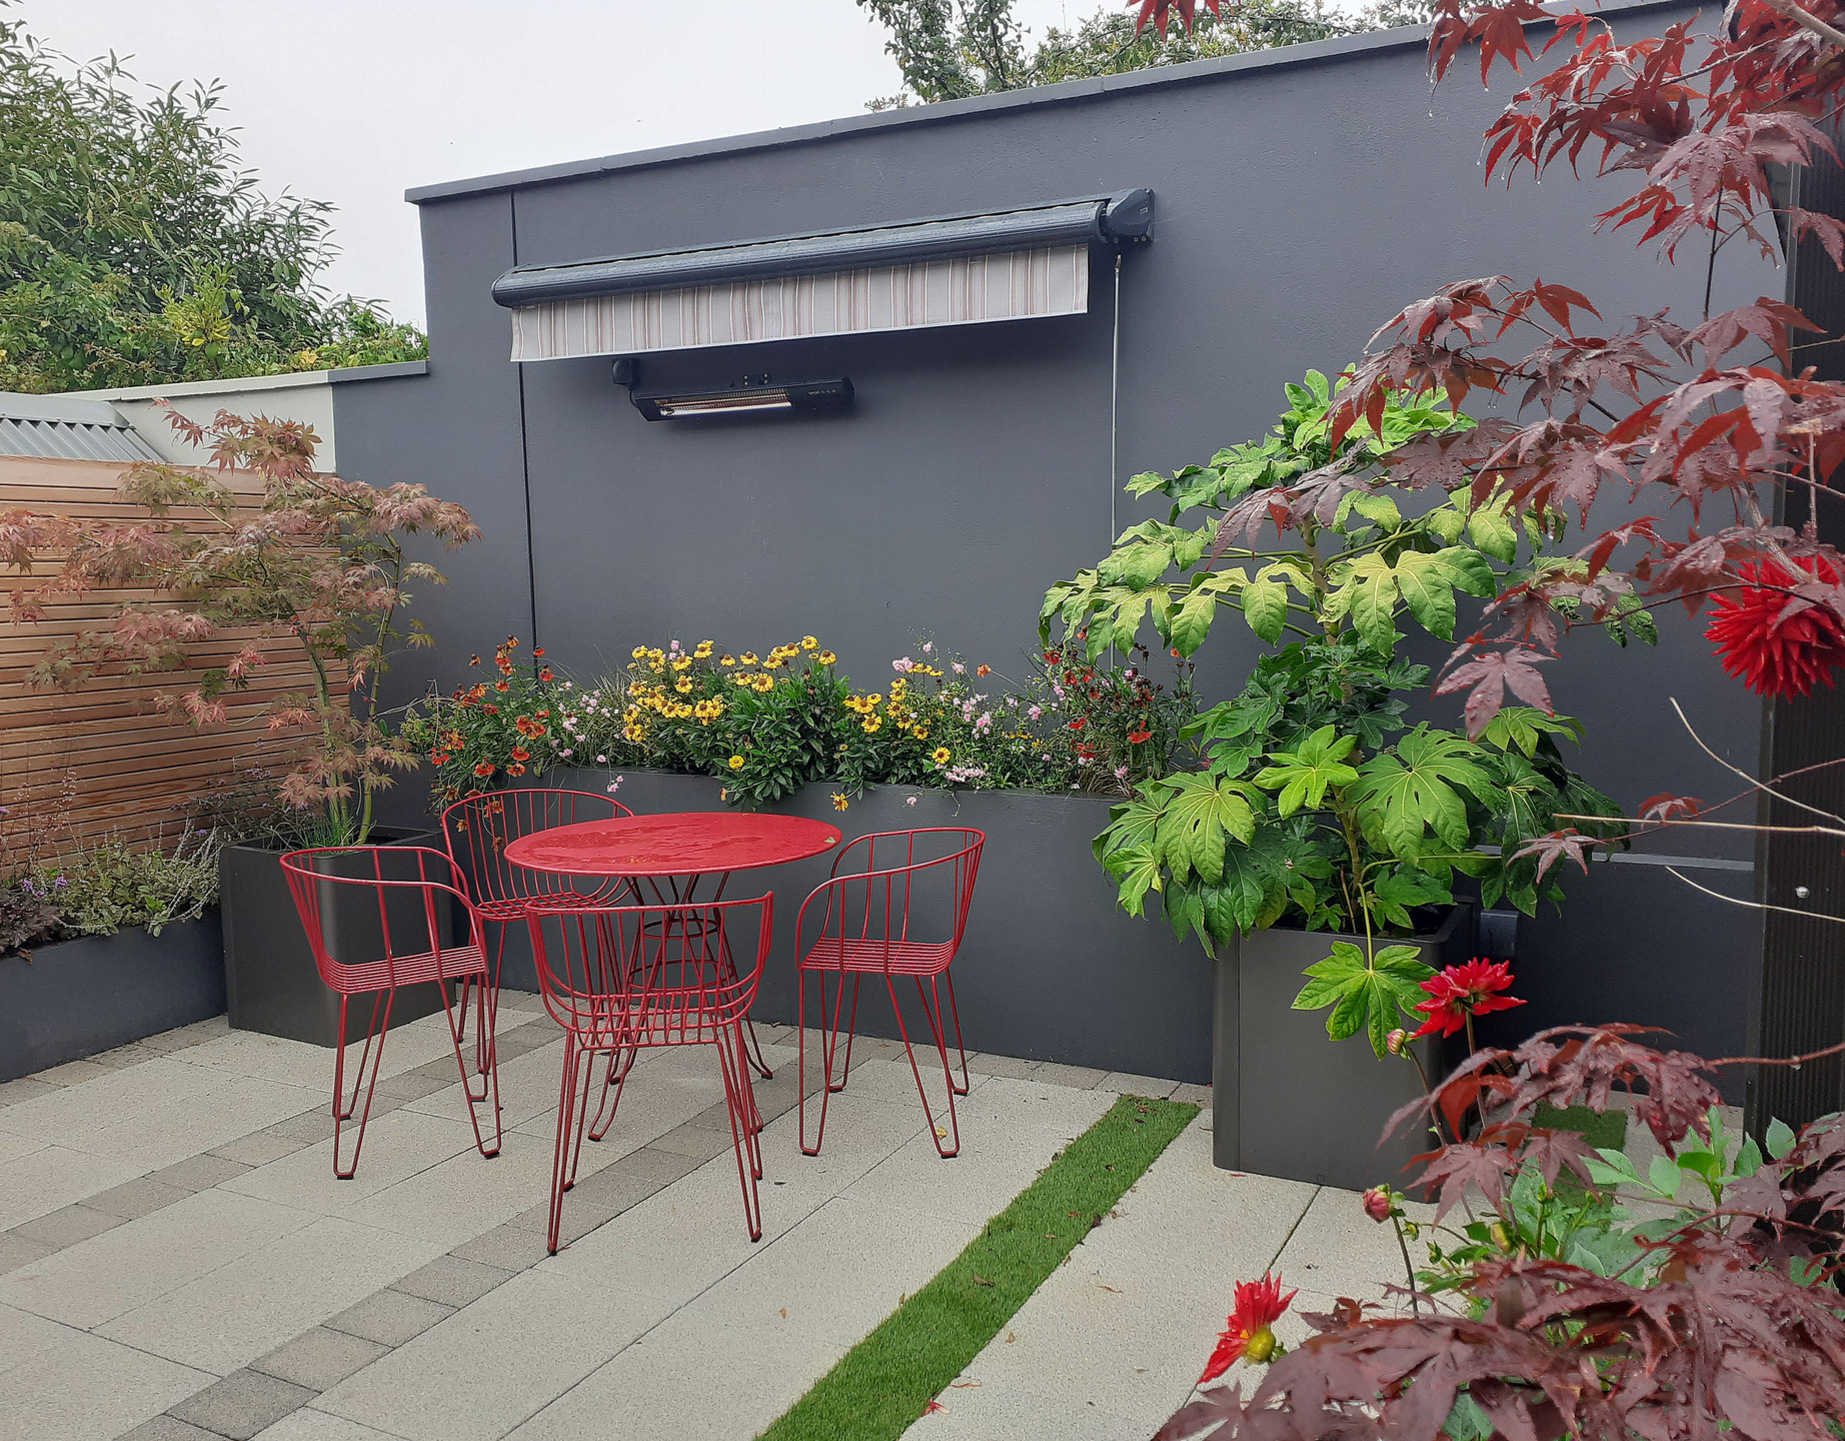 Biohort Belvedere Planters - stylish & robust steel planters | Supplied + fitted in Dundrum, Dublin 14